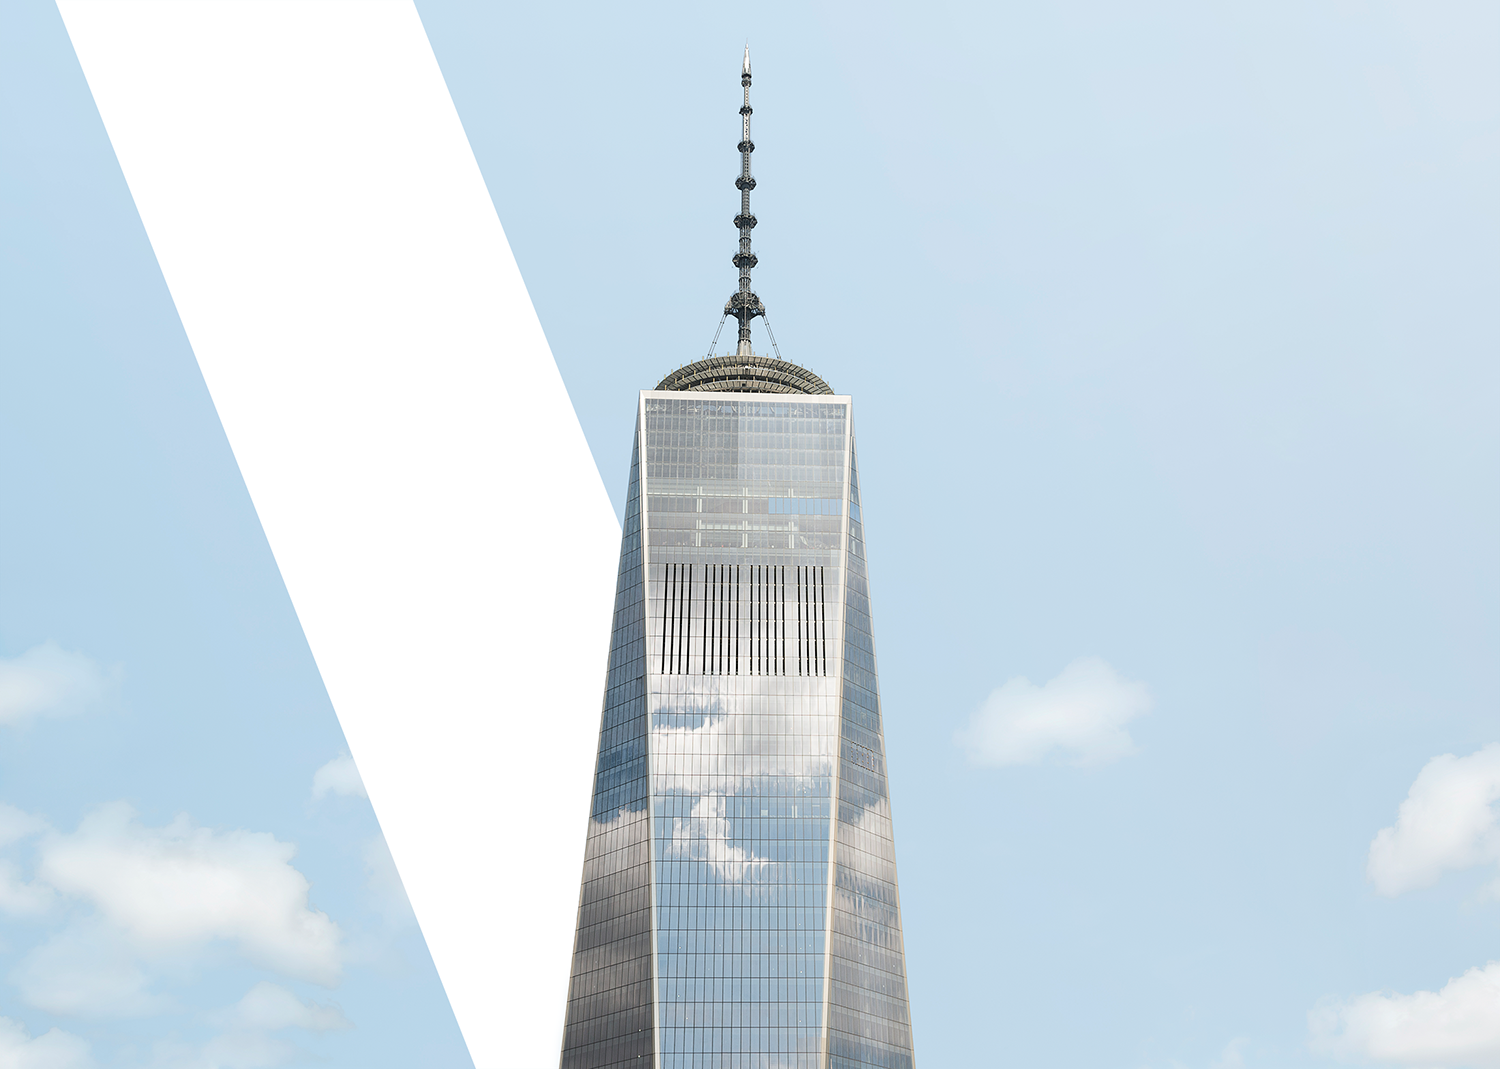 wsp-wtc-image - Click to Download